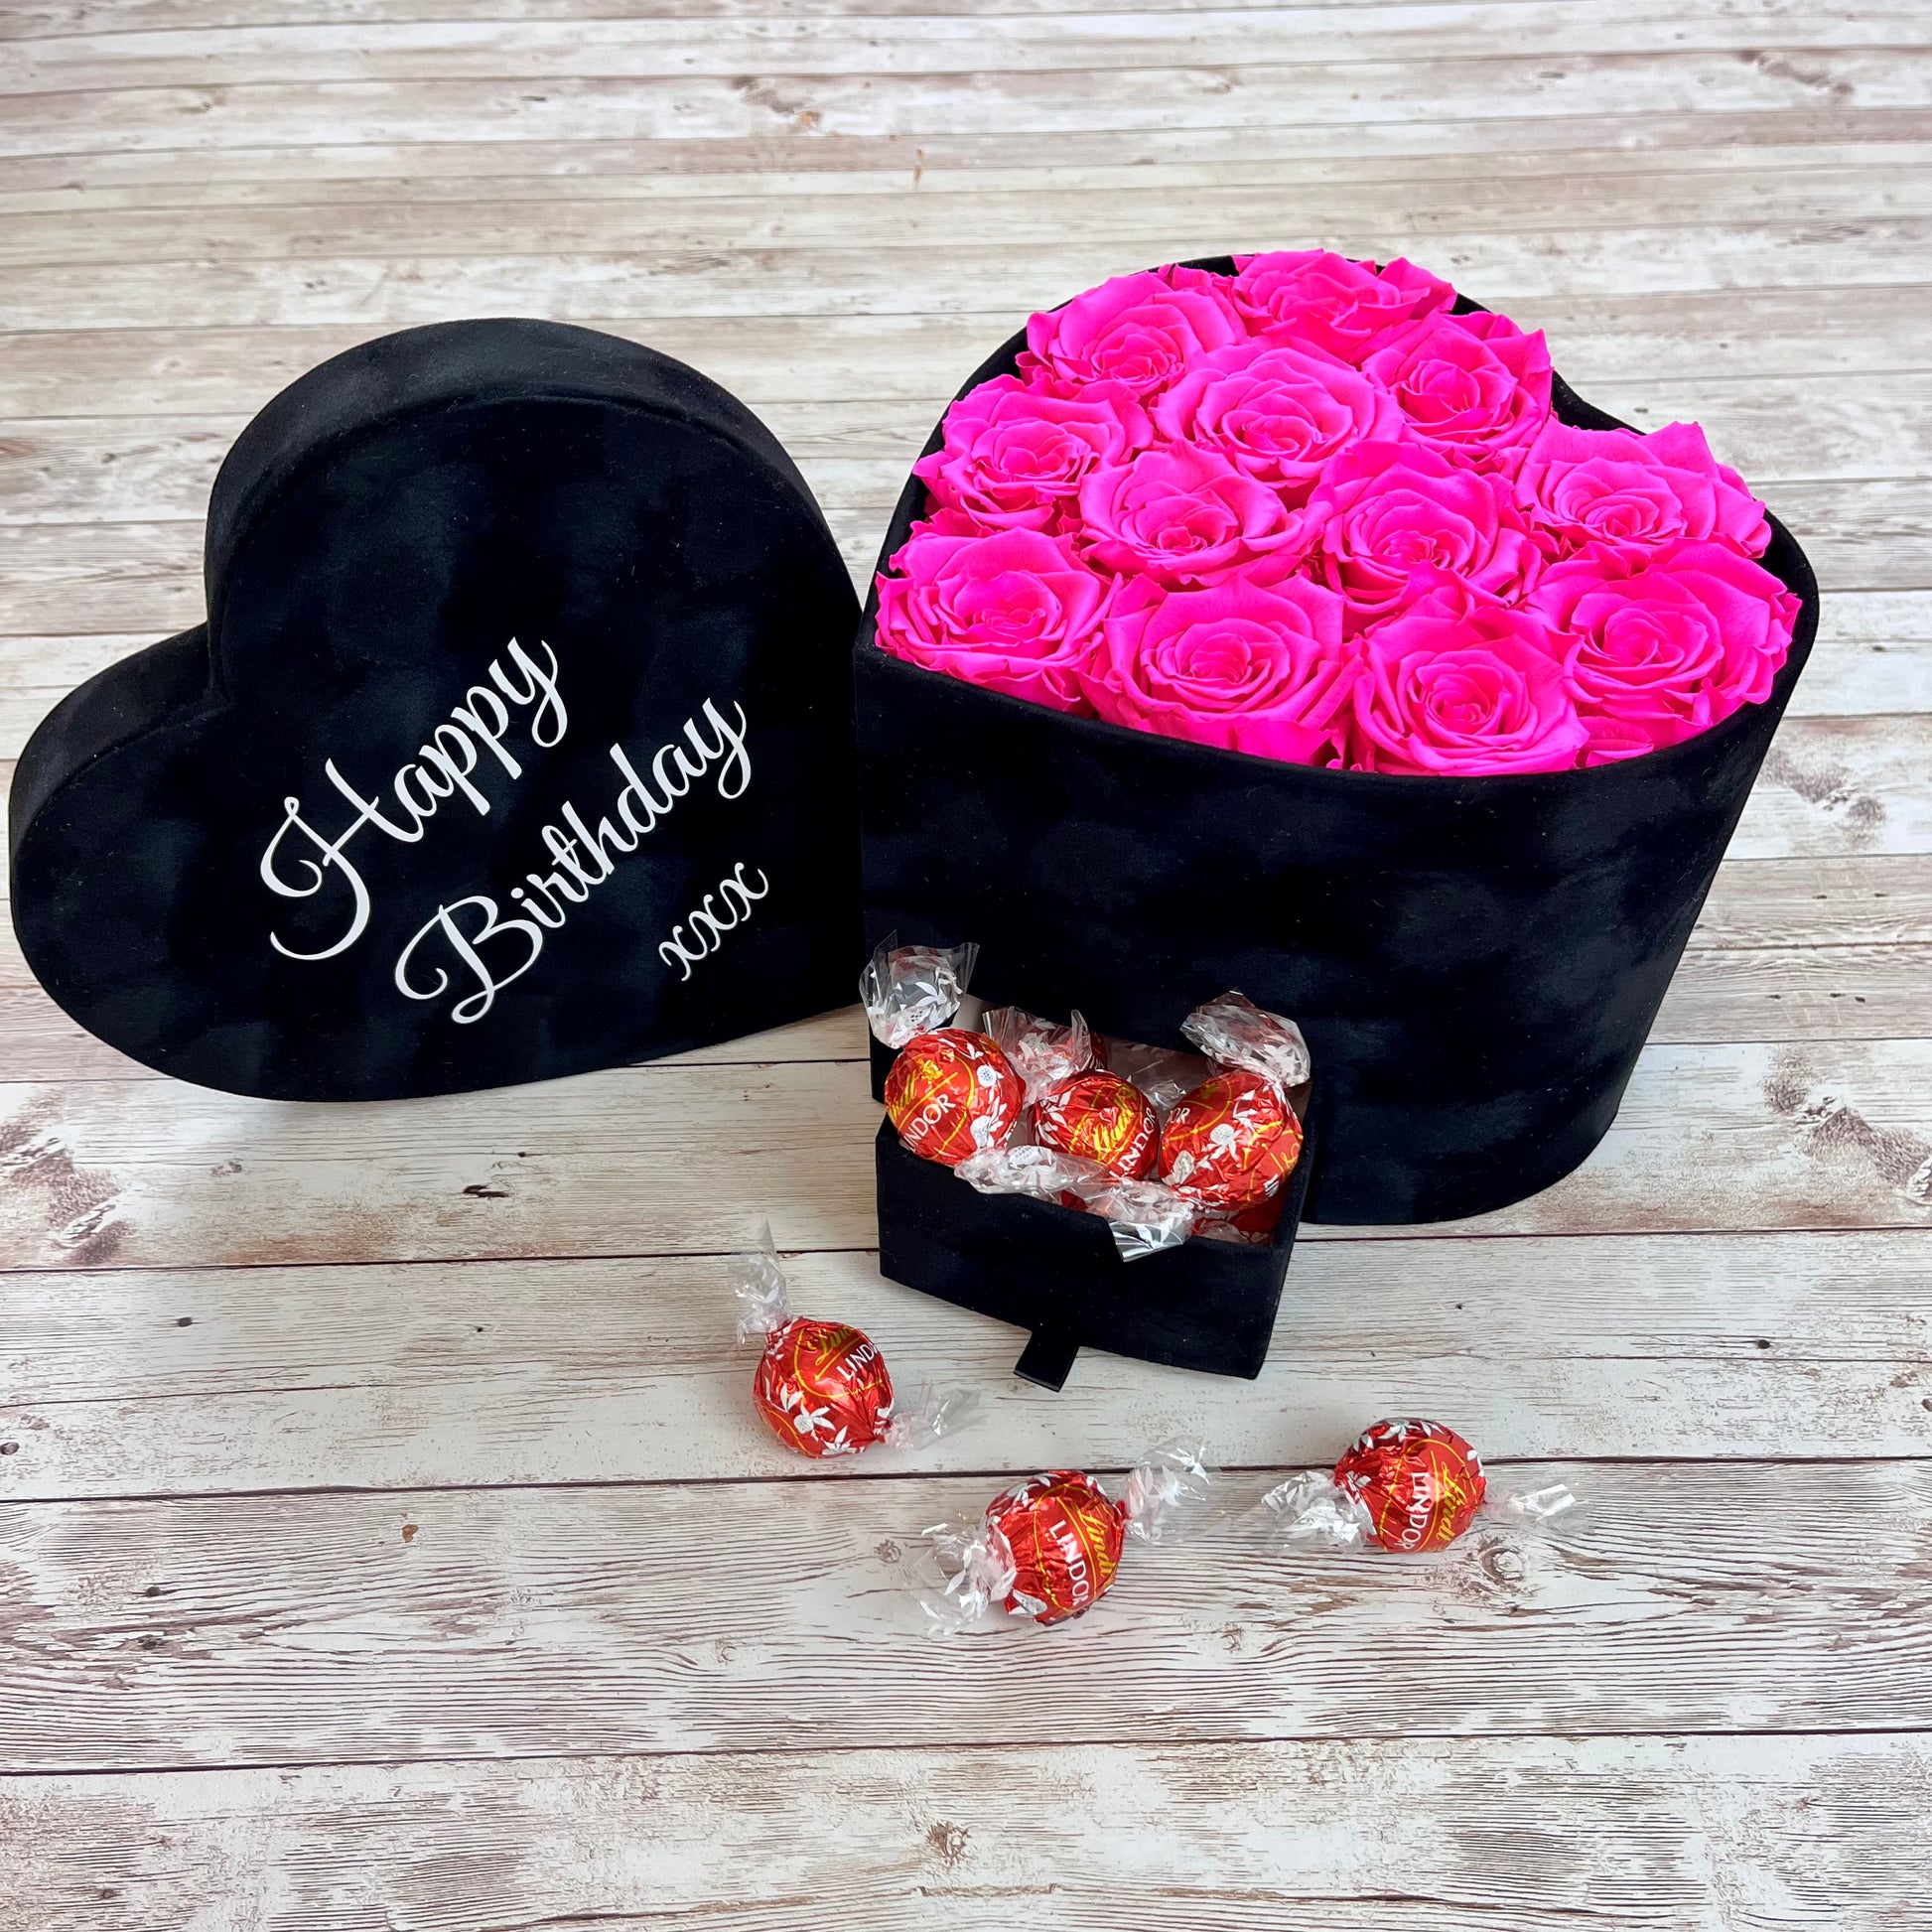 Black Velvet Heart Infinity Rose Box with chocolates - Shocking Pink One Year Roses - Rose Colours divider-Shocking Pink